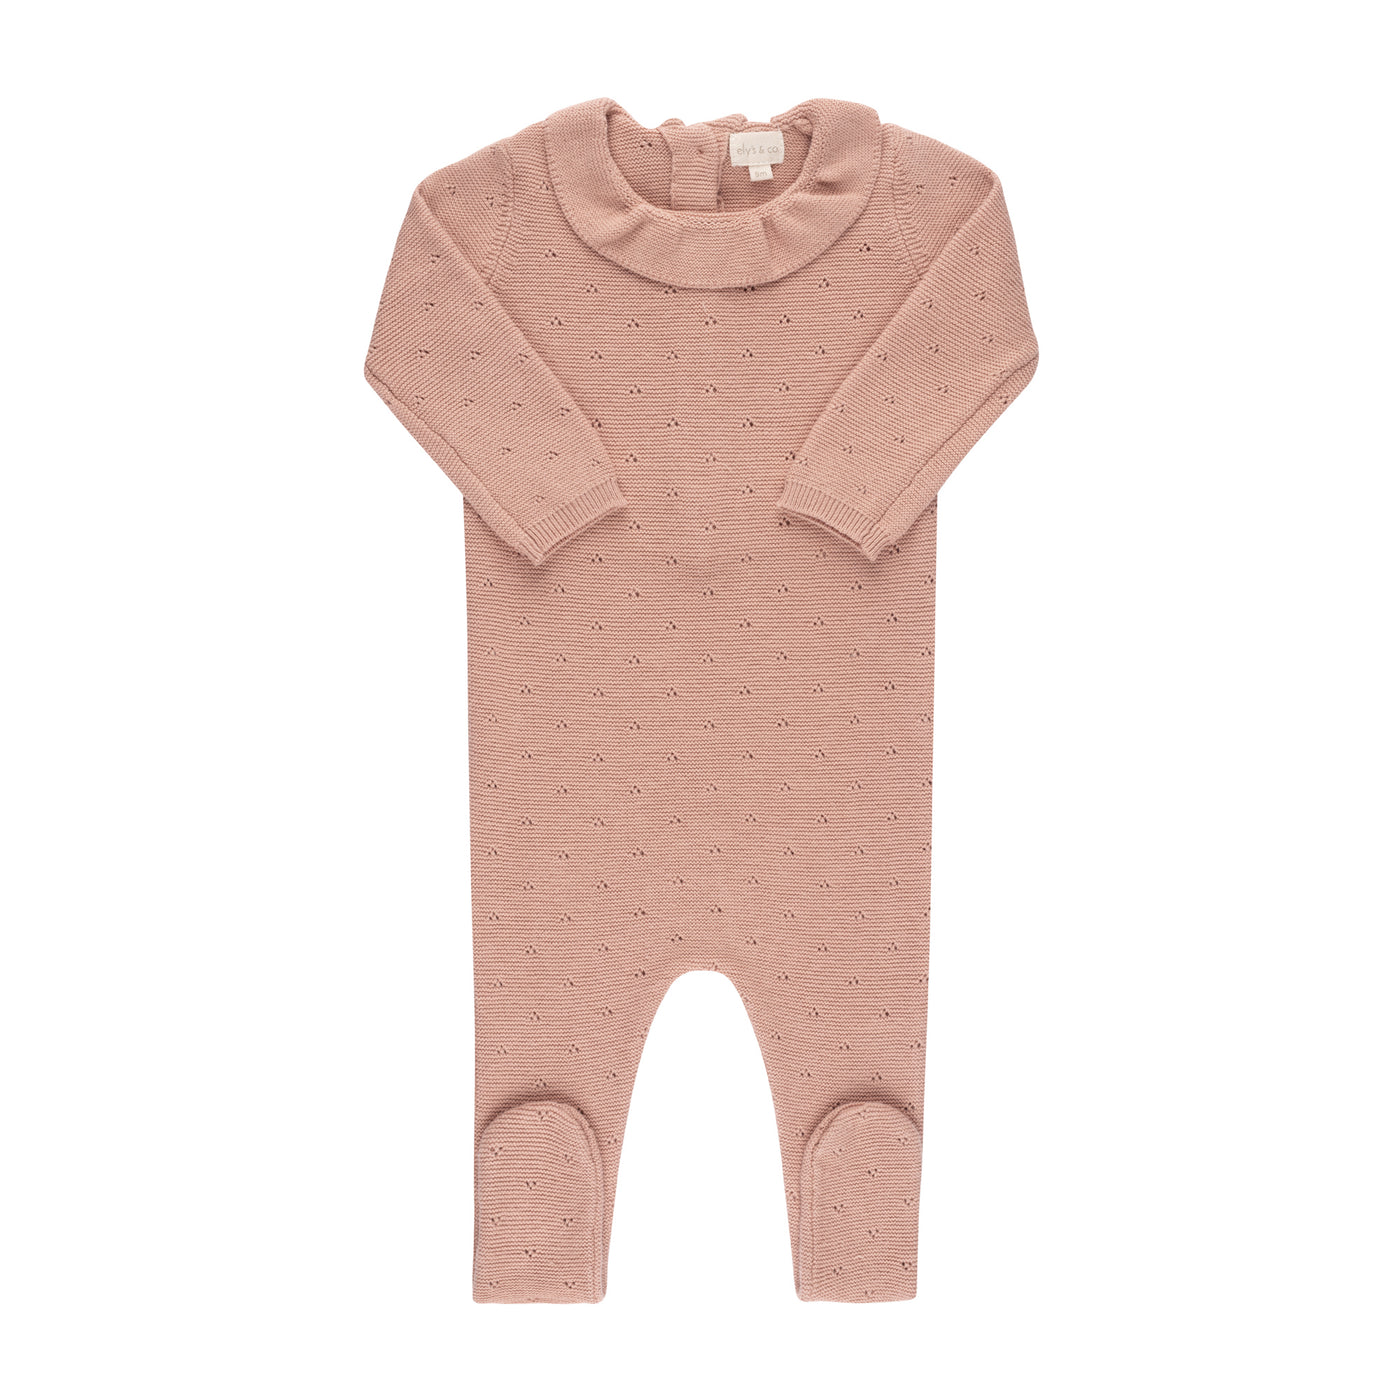 Ely's & Co. Pointelle Knit Mahogany Rose Footie